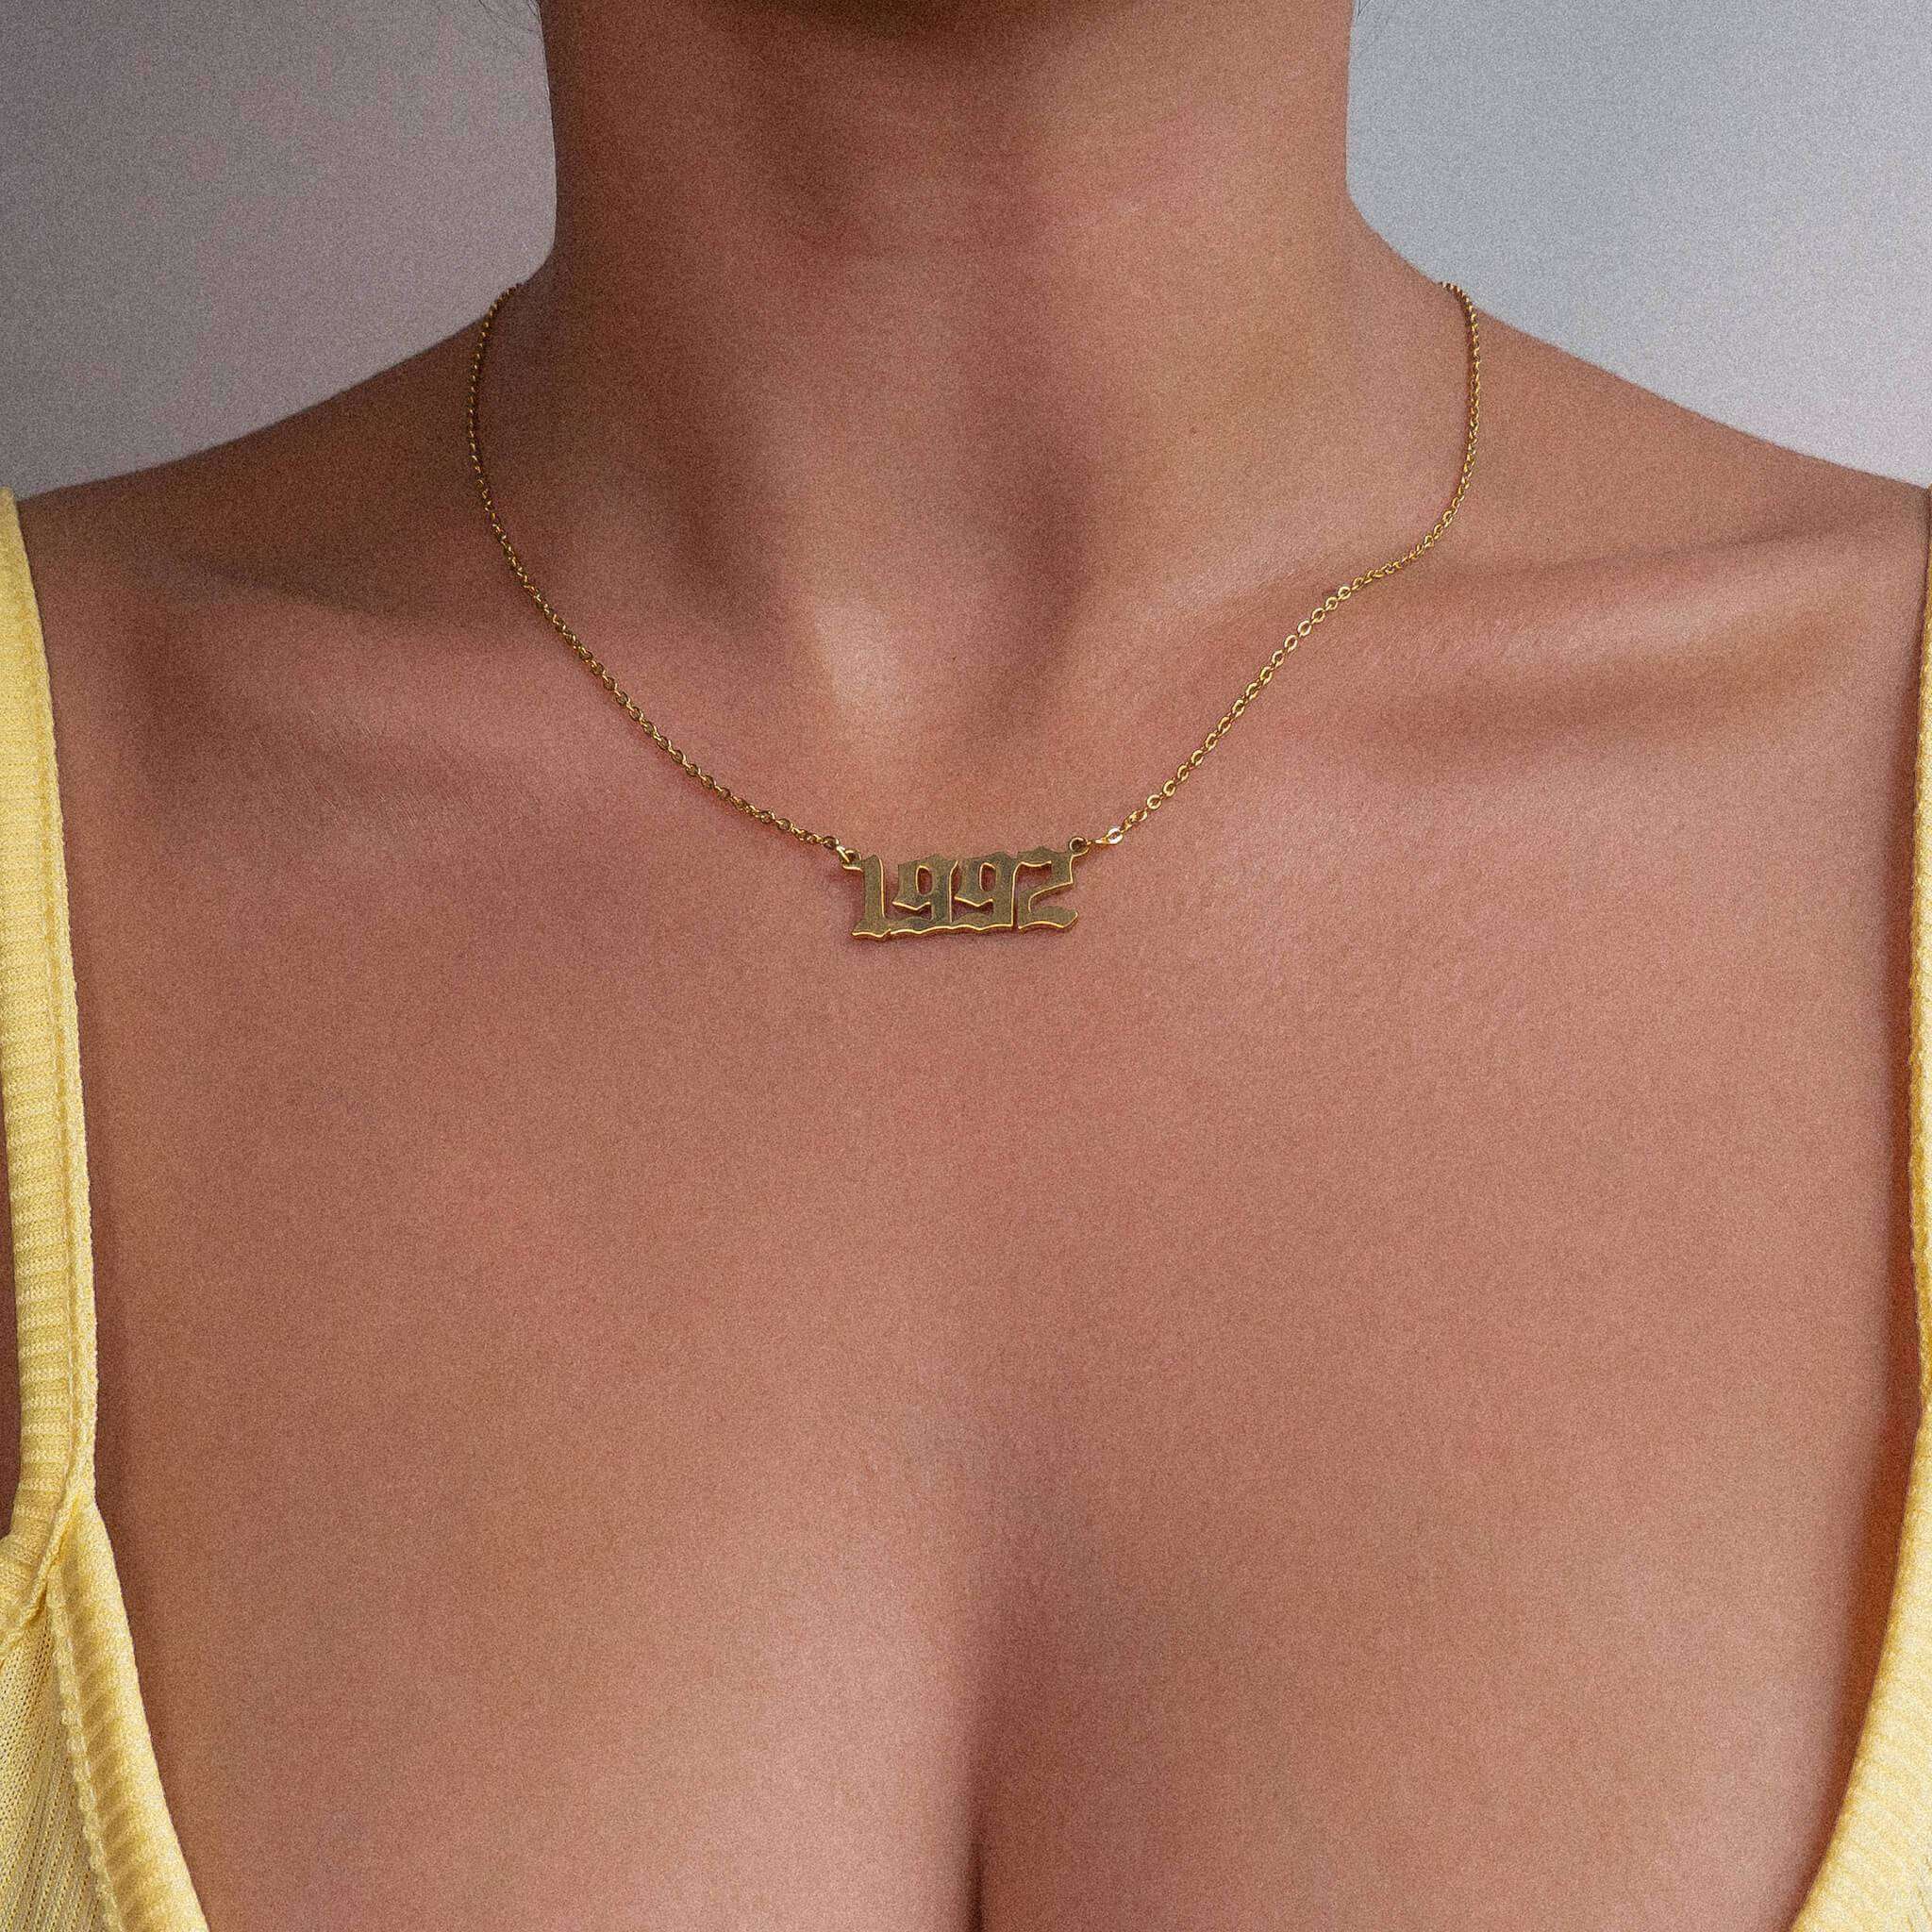 Woman wearing a yellow strappy top sporting a 1992 gold birth year chain necklace